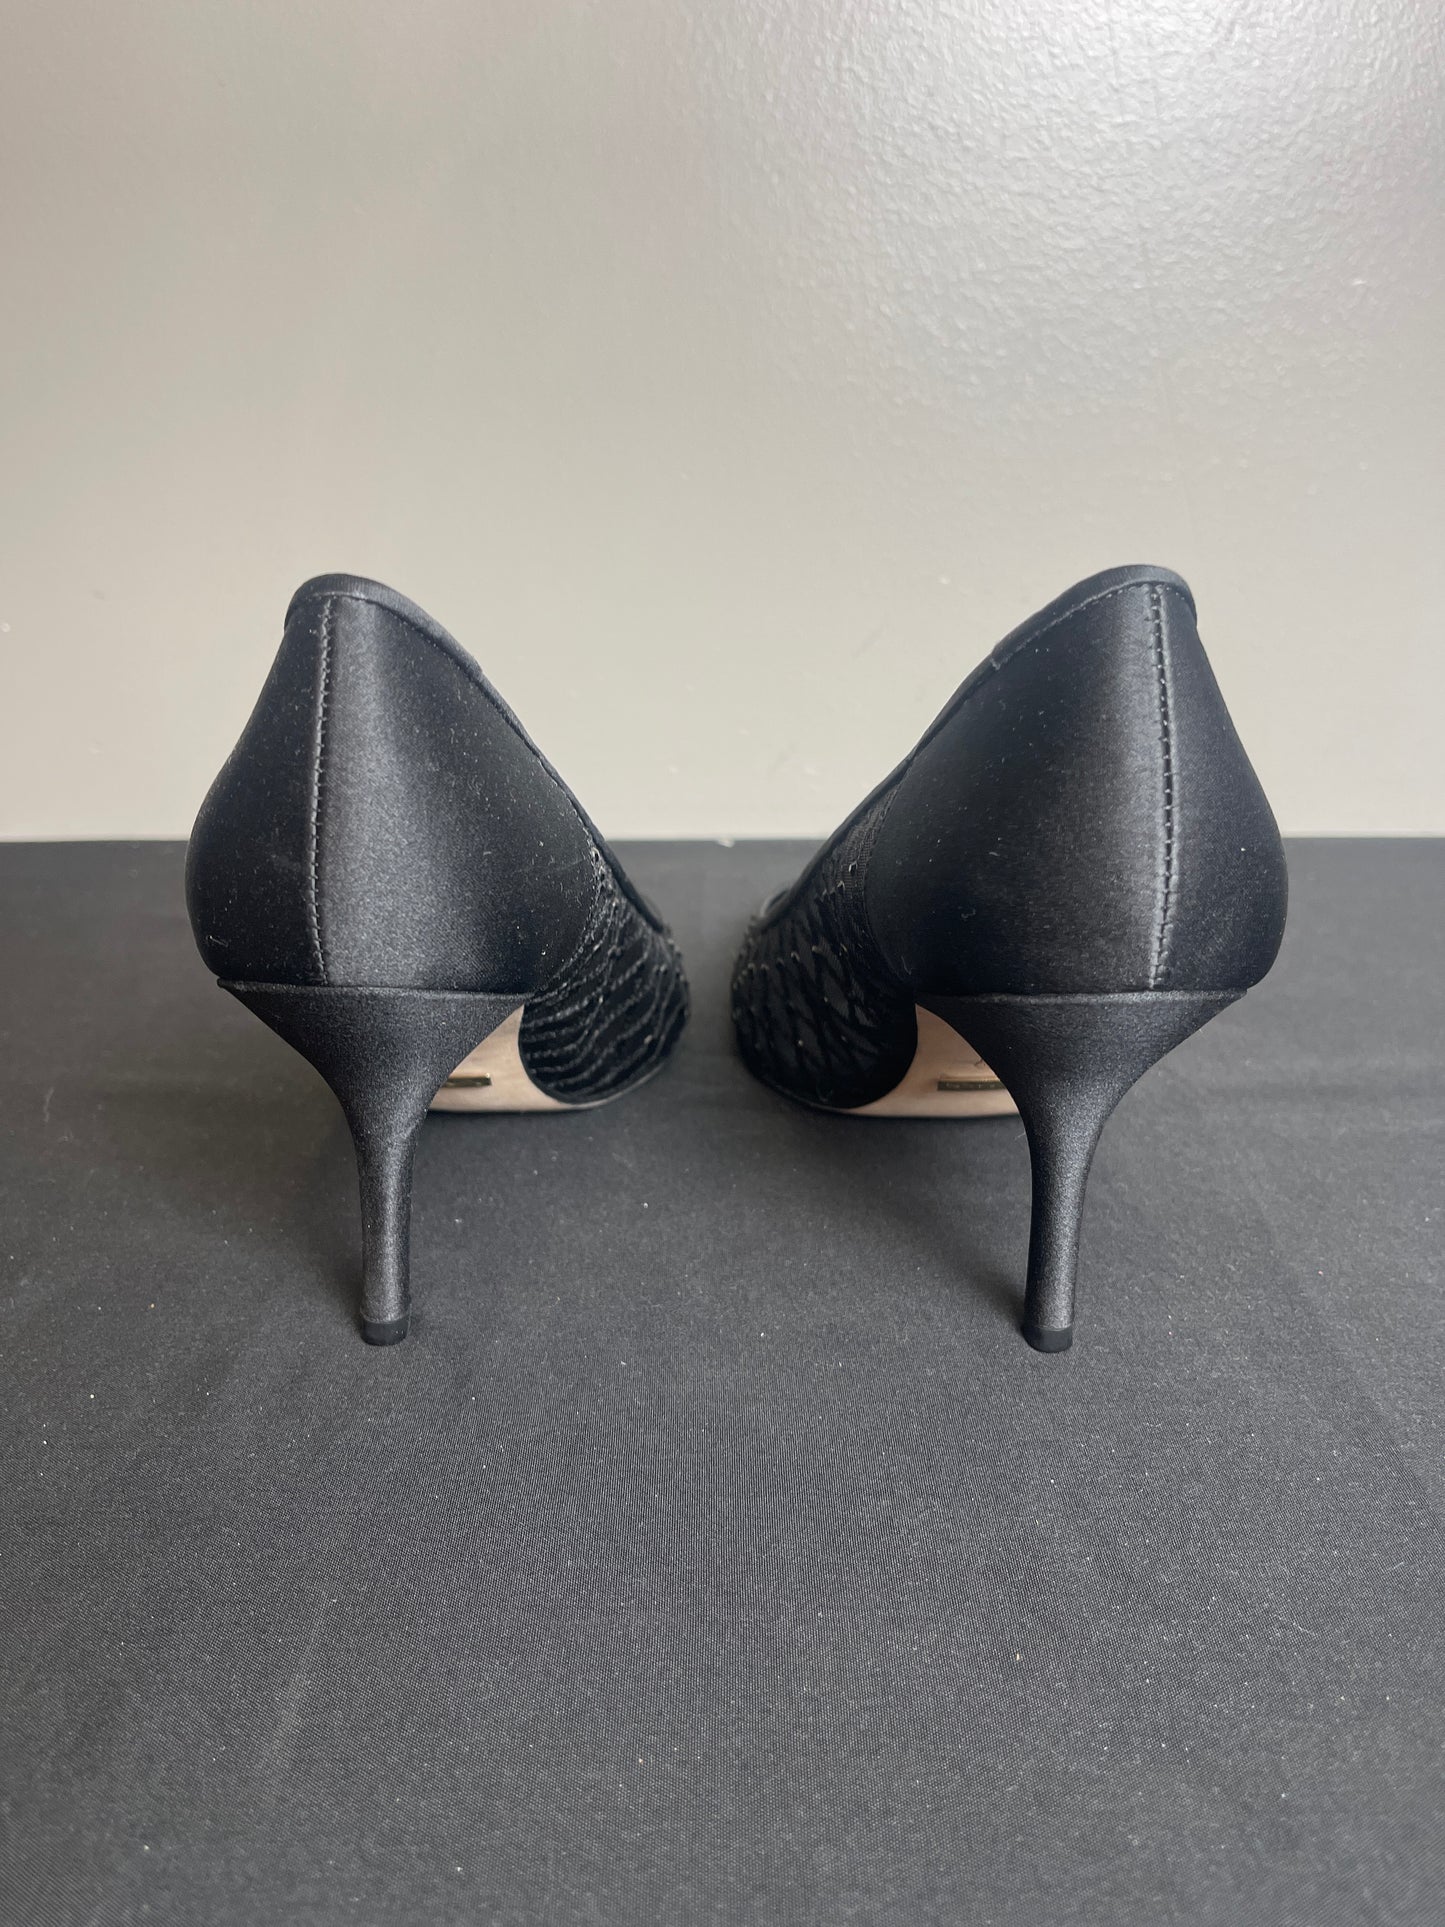 Shoes Heels Stiletto By Nina  Size: 8.5